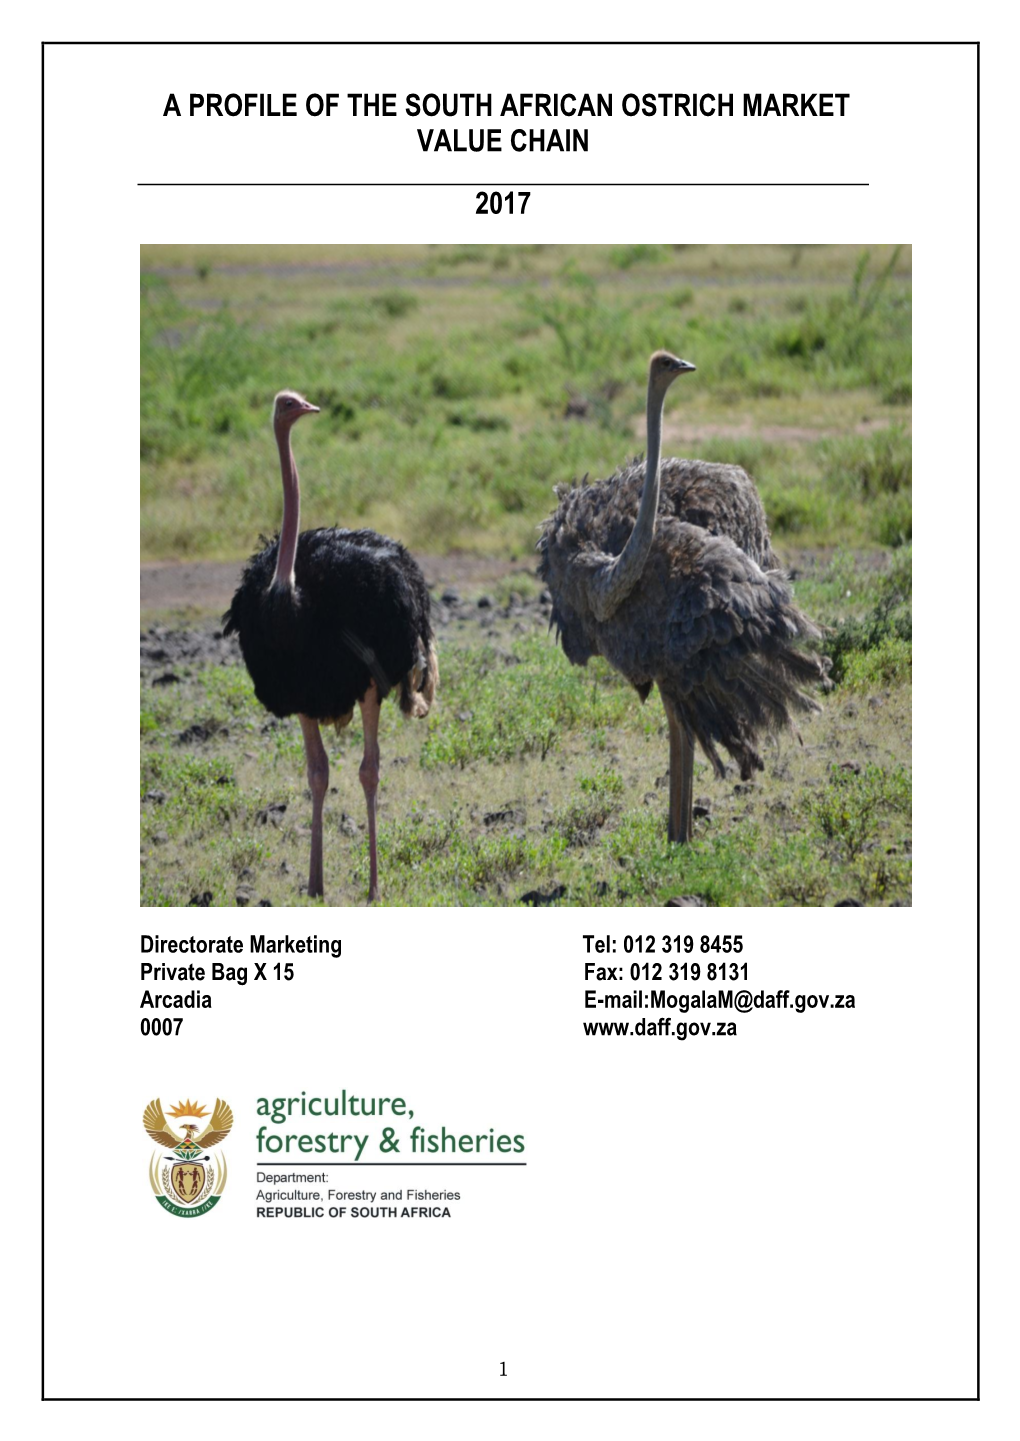 A Profile of the South African Ostrich Market Value Chain 2017